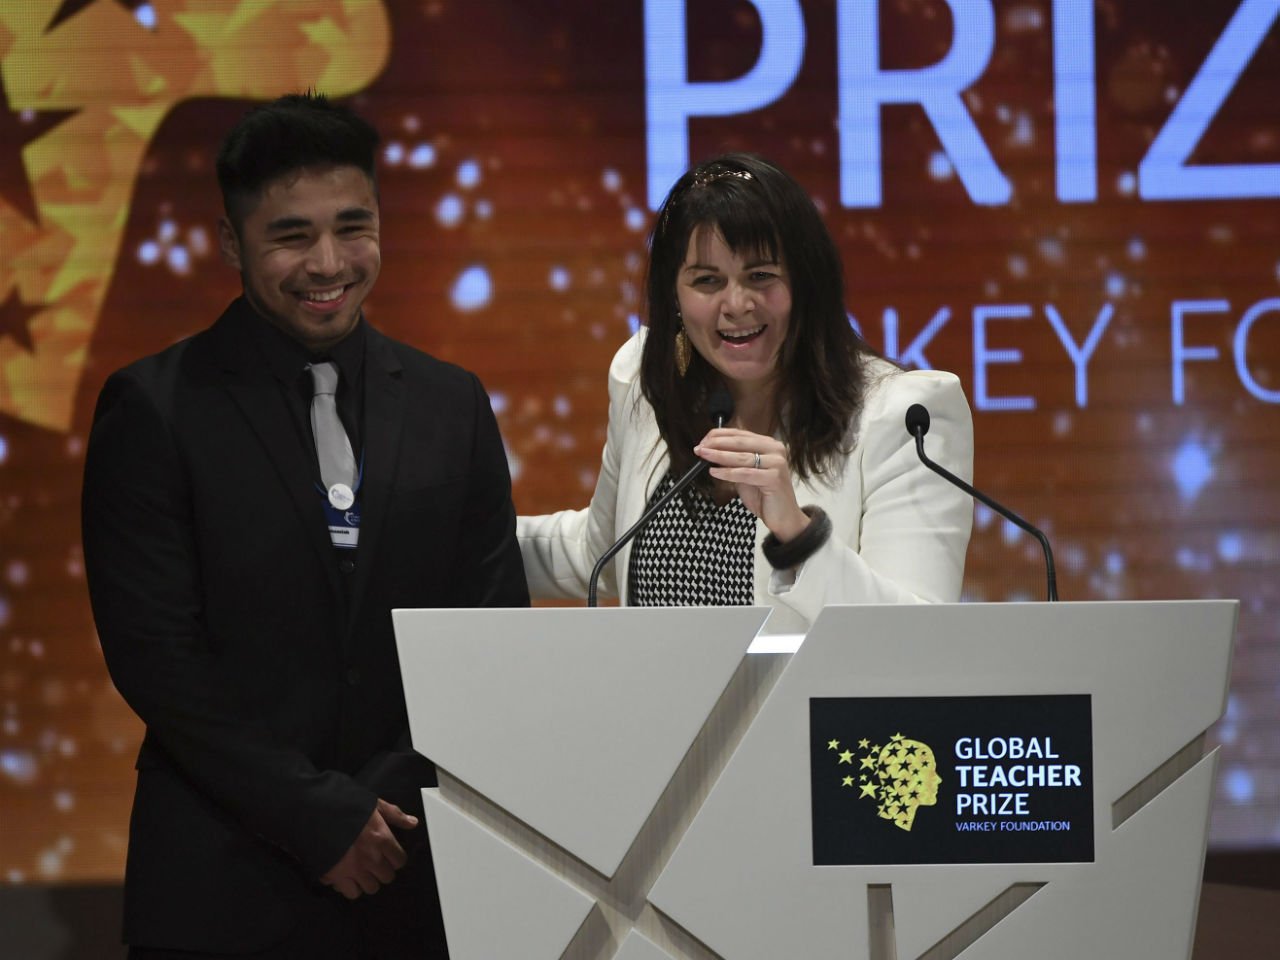 Maggie MacDonnell receiving prize in Dubai at the Global Teacher Prize ceremony